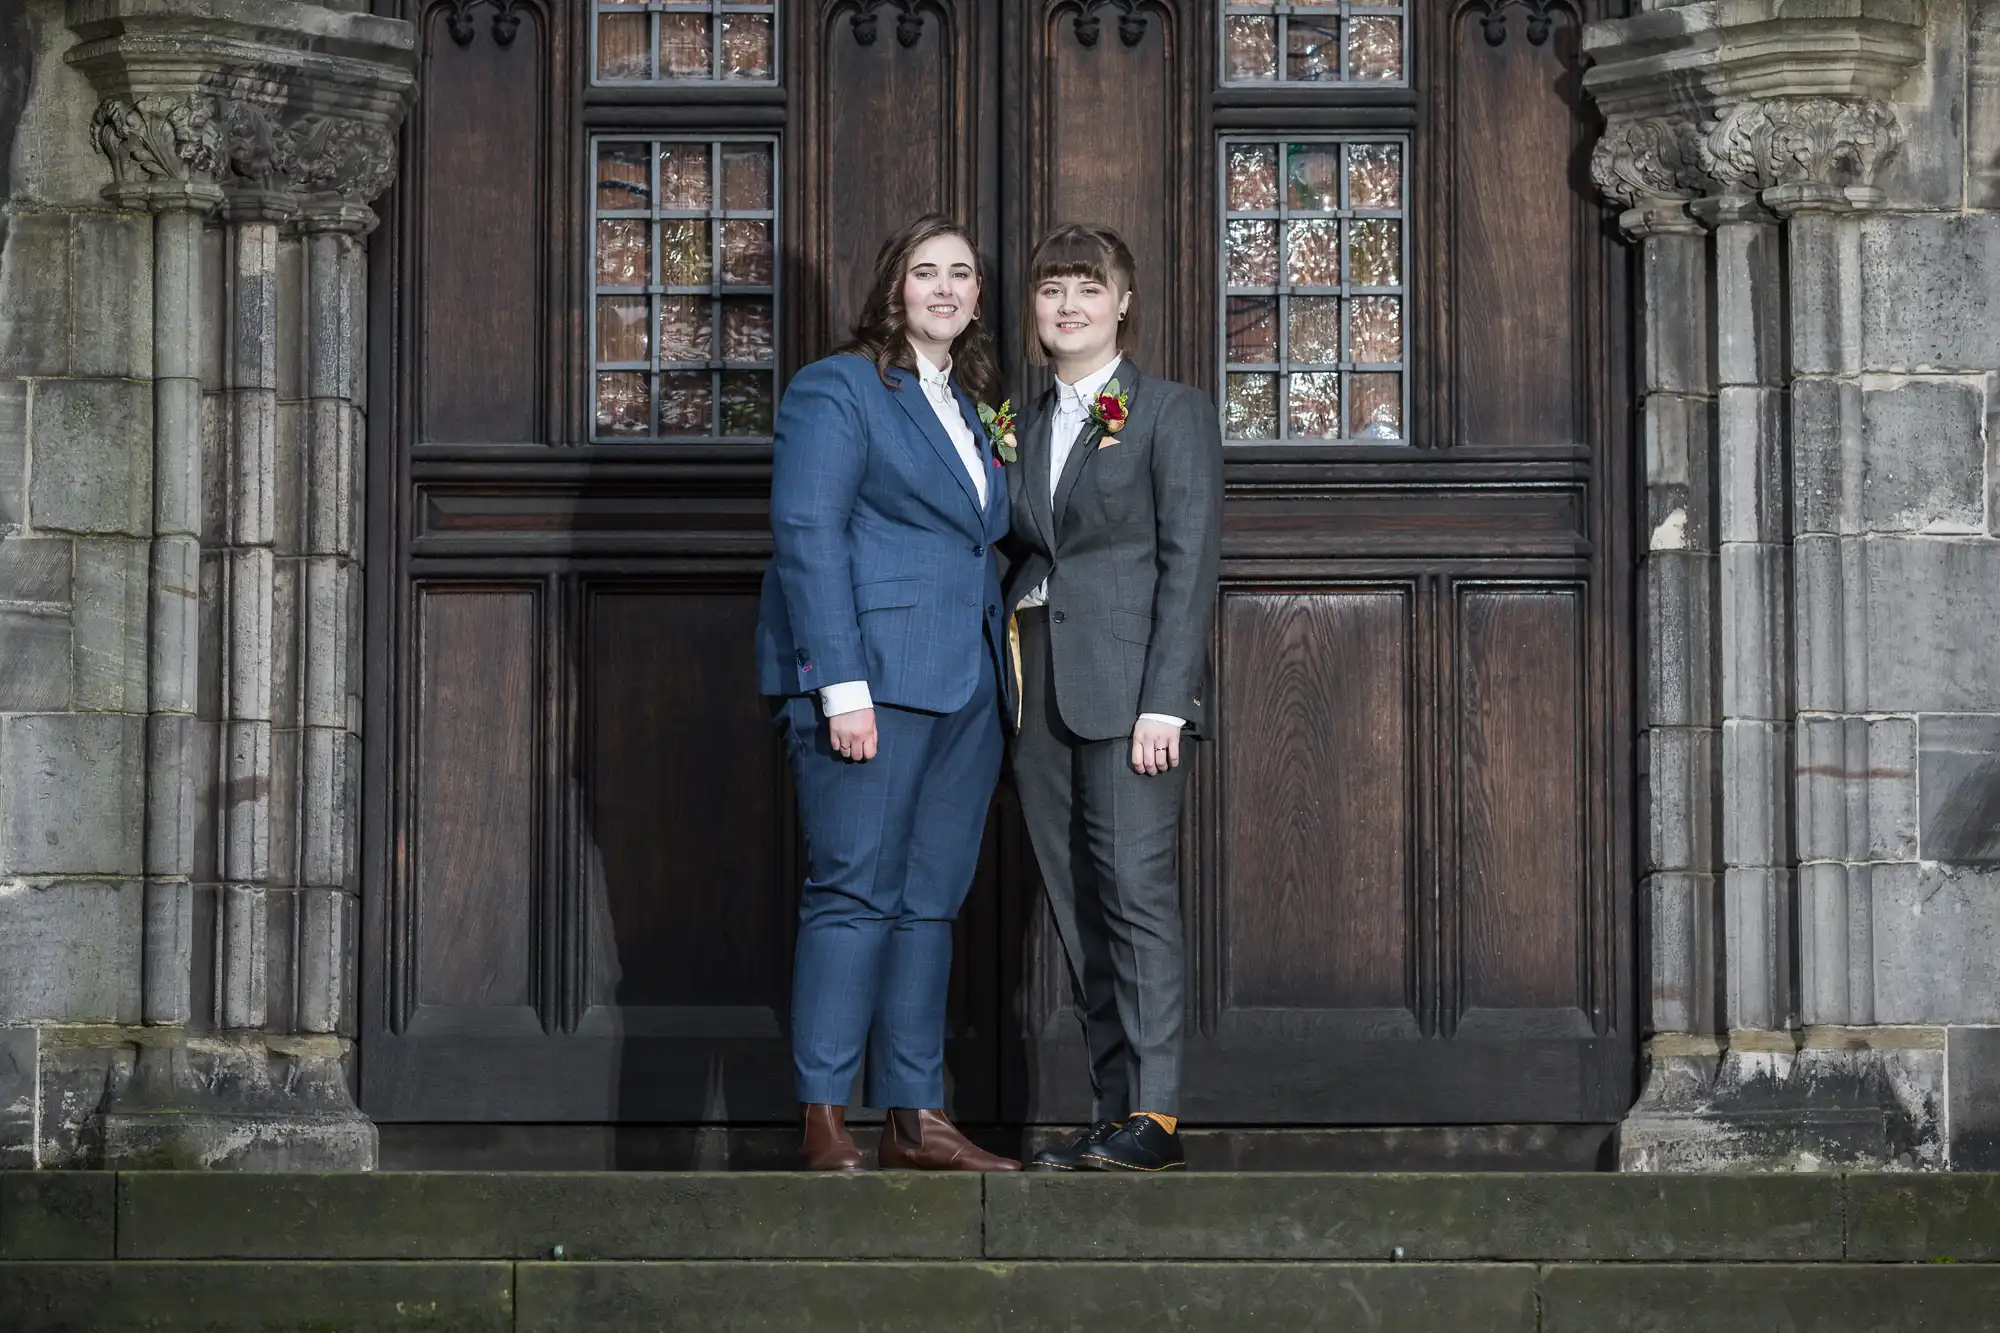 Two newlywed ladies in suits stand side by side on steps in front of a large wooden door with ornate stone columns on either side. Both are smiling and looking at the camera.